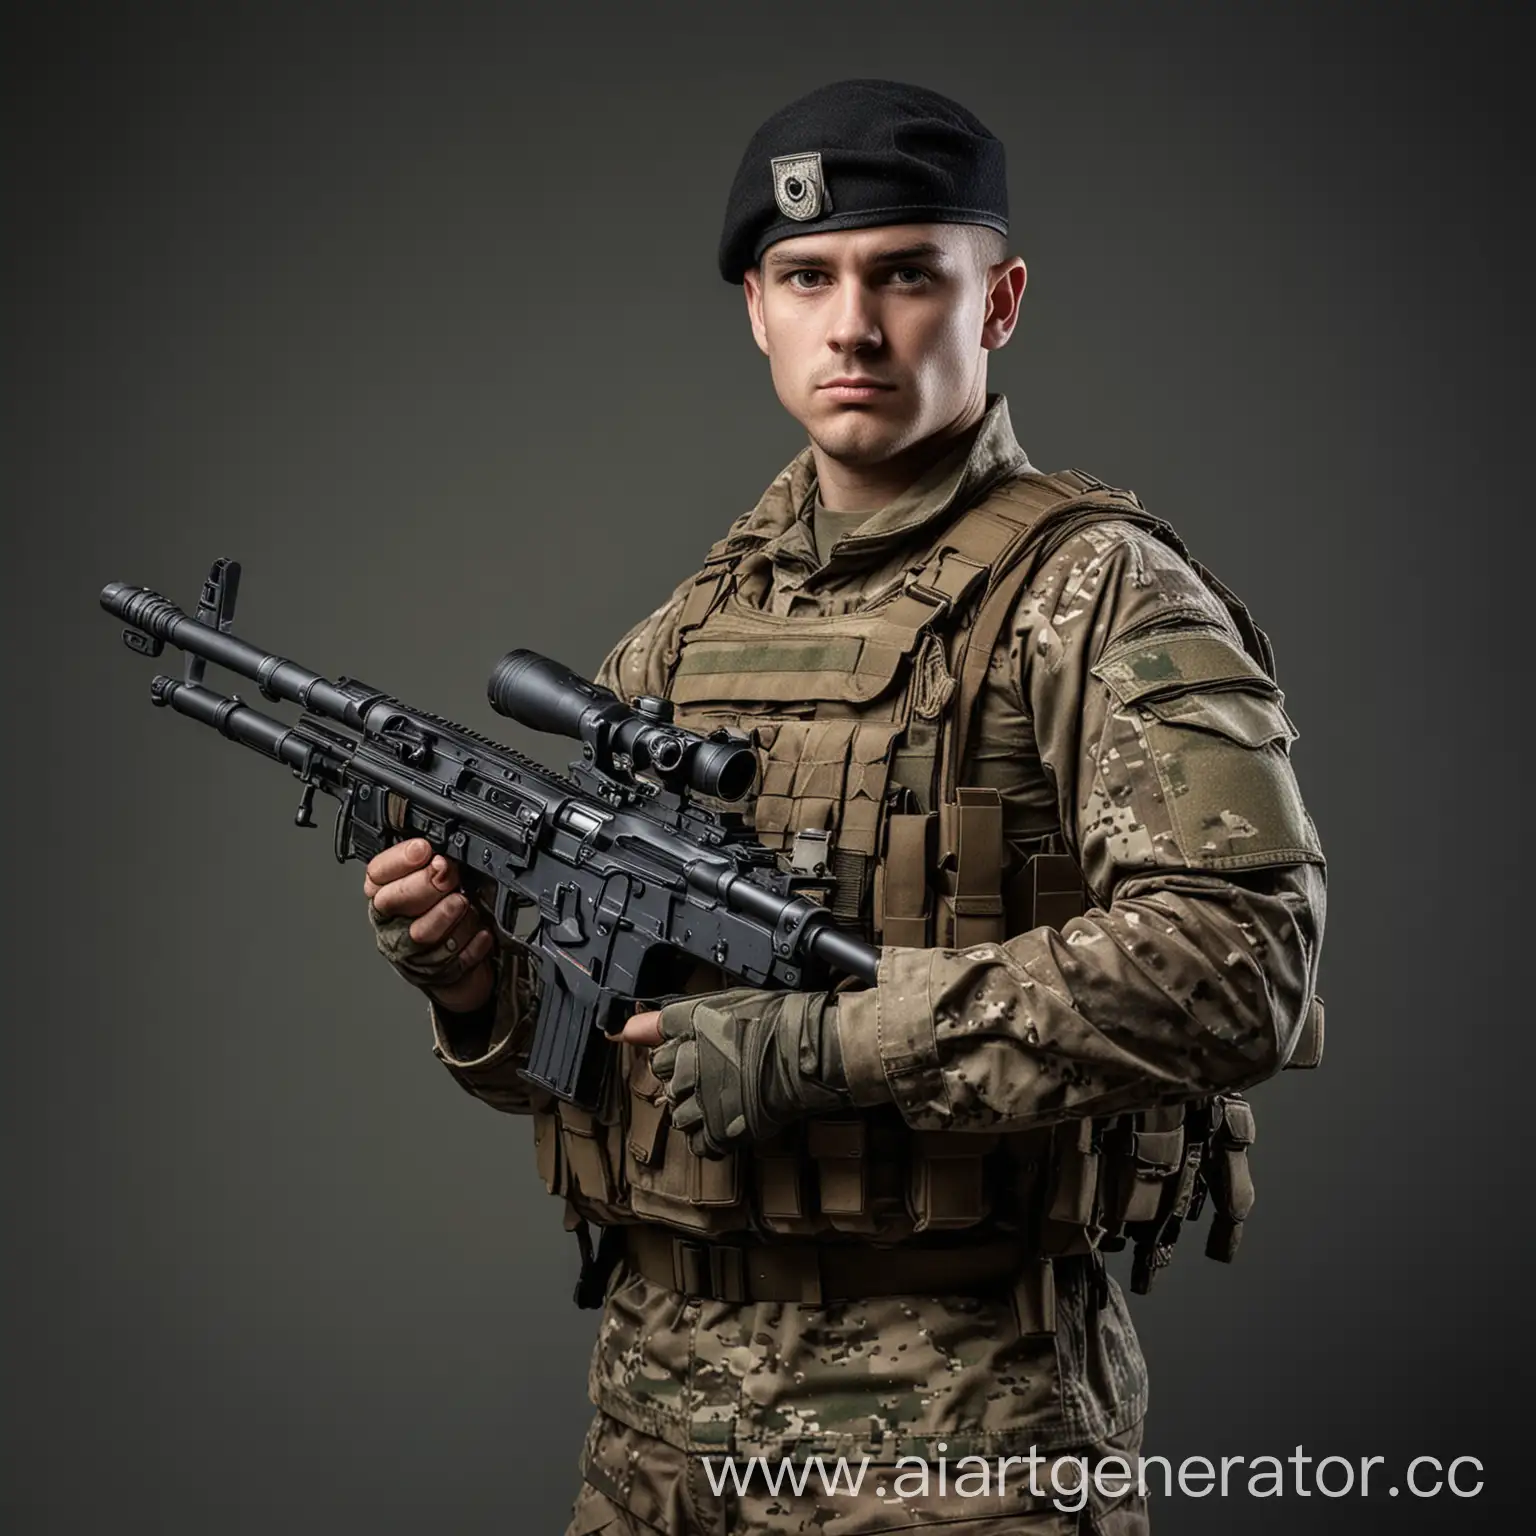 Soldier-in-Military-Uniform-Holding-Weapon